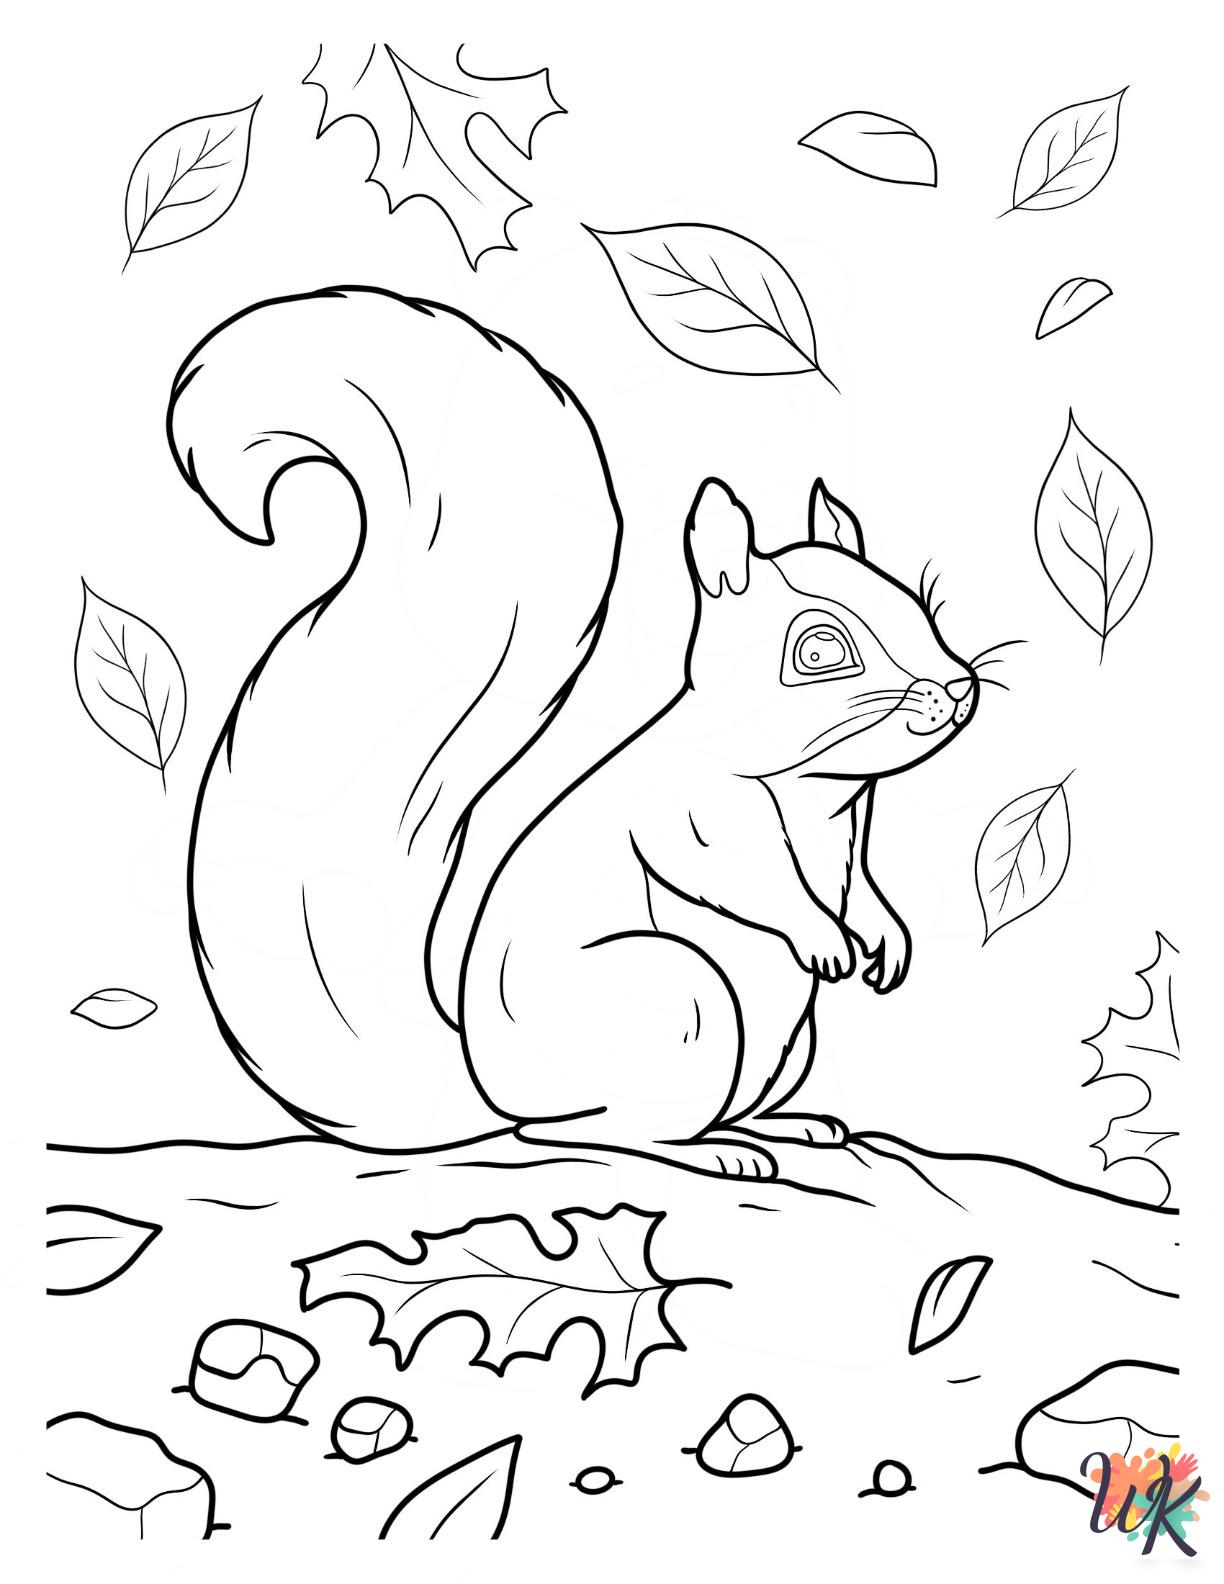 Squirrel adult coloring pages 1